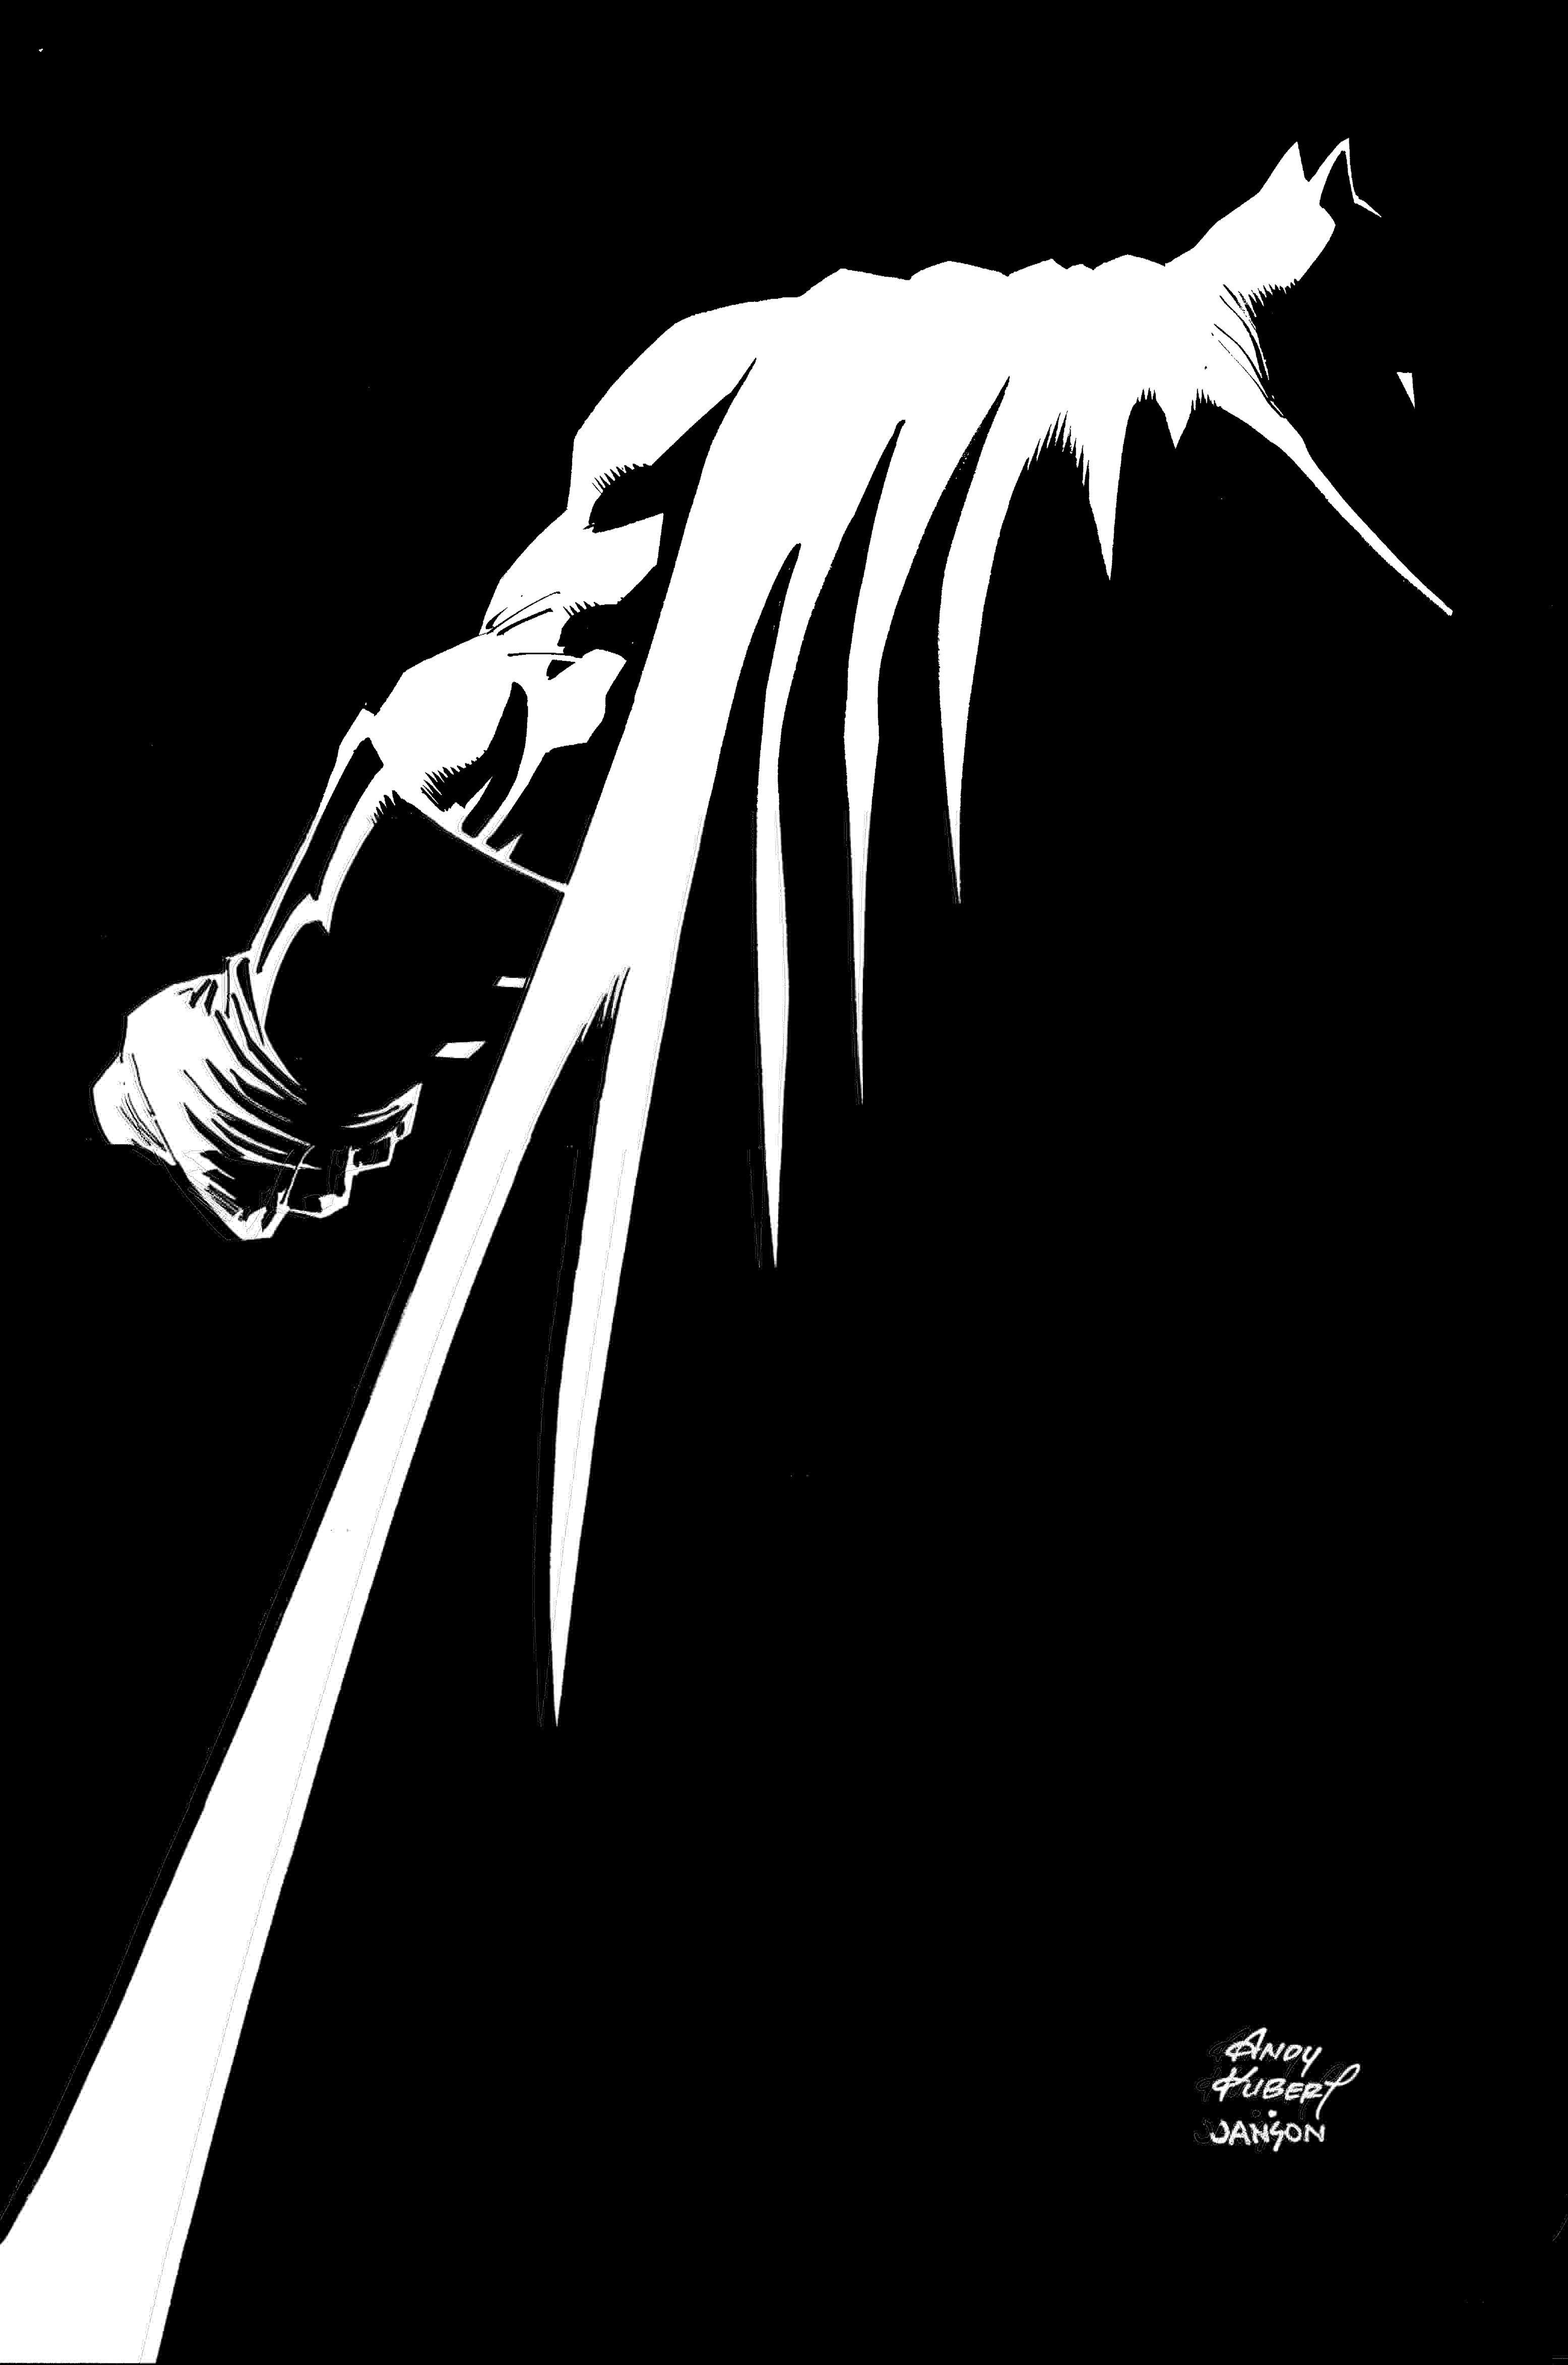 SDCC: DC sheds light on Dark Knight Returns sequel 'The Master Race'